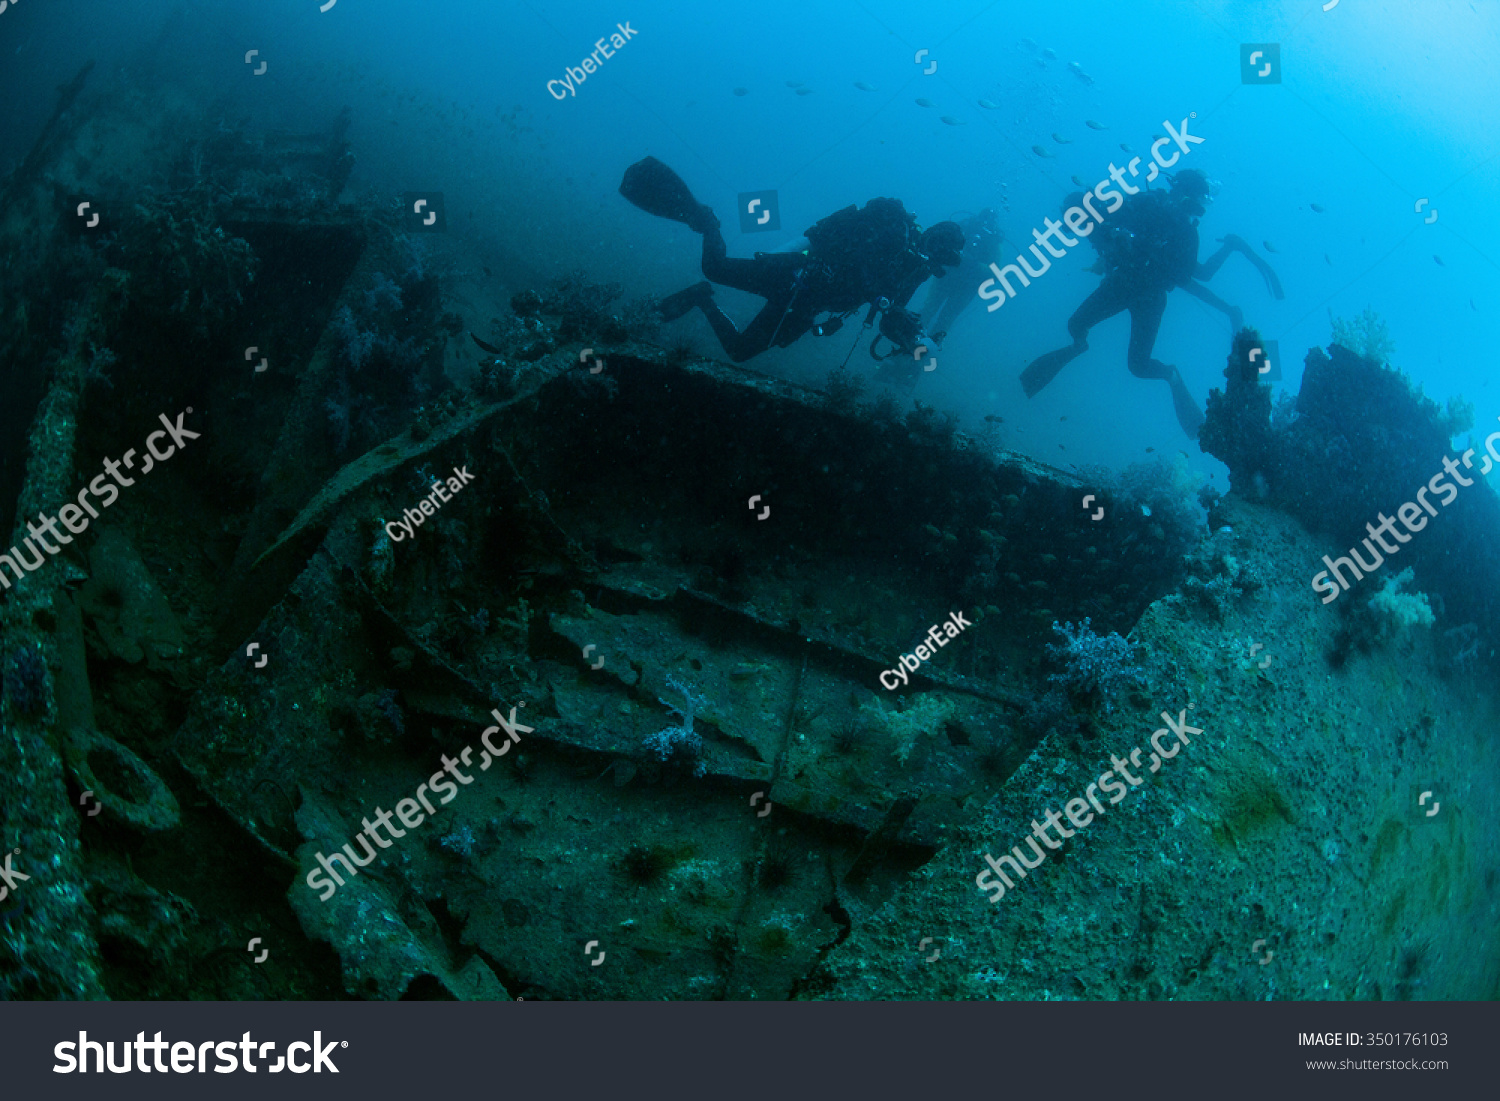 Underwater deep blue sea and scuba divers
 #350176103